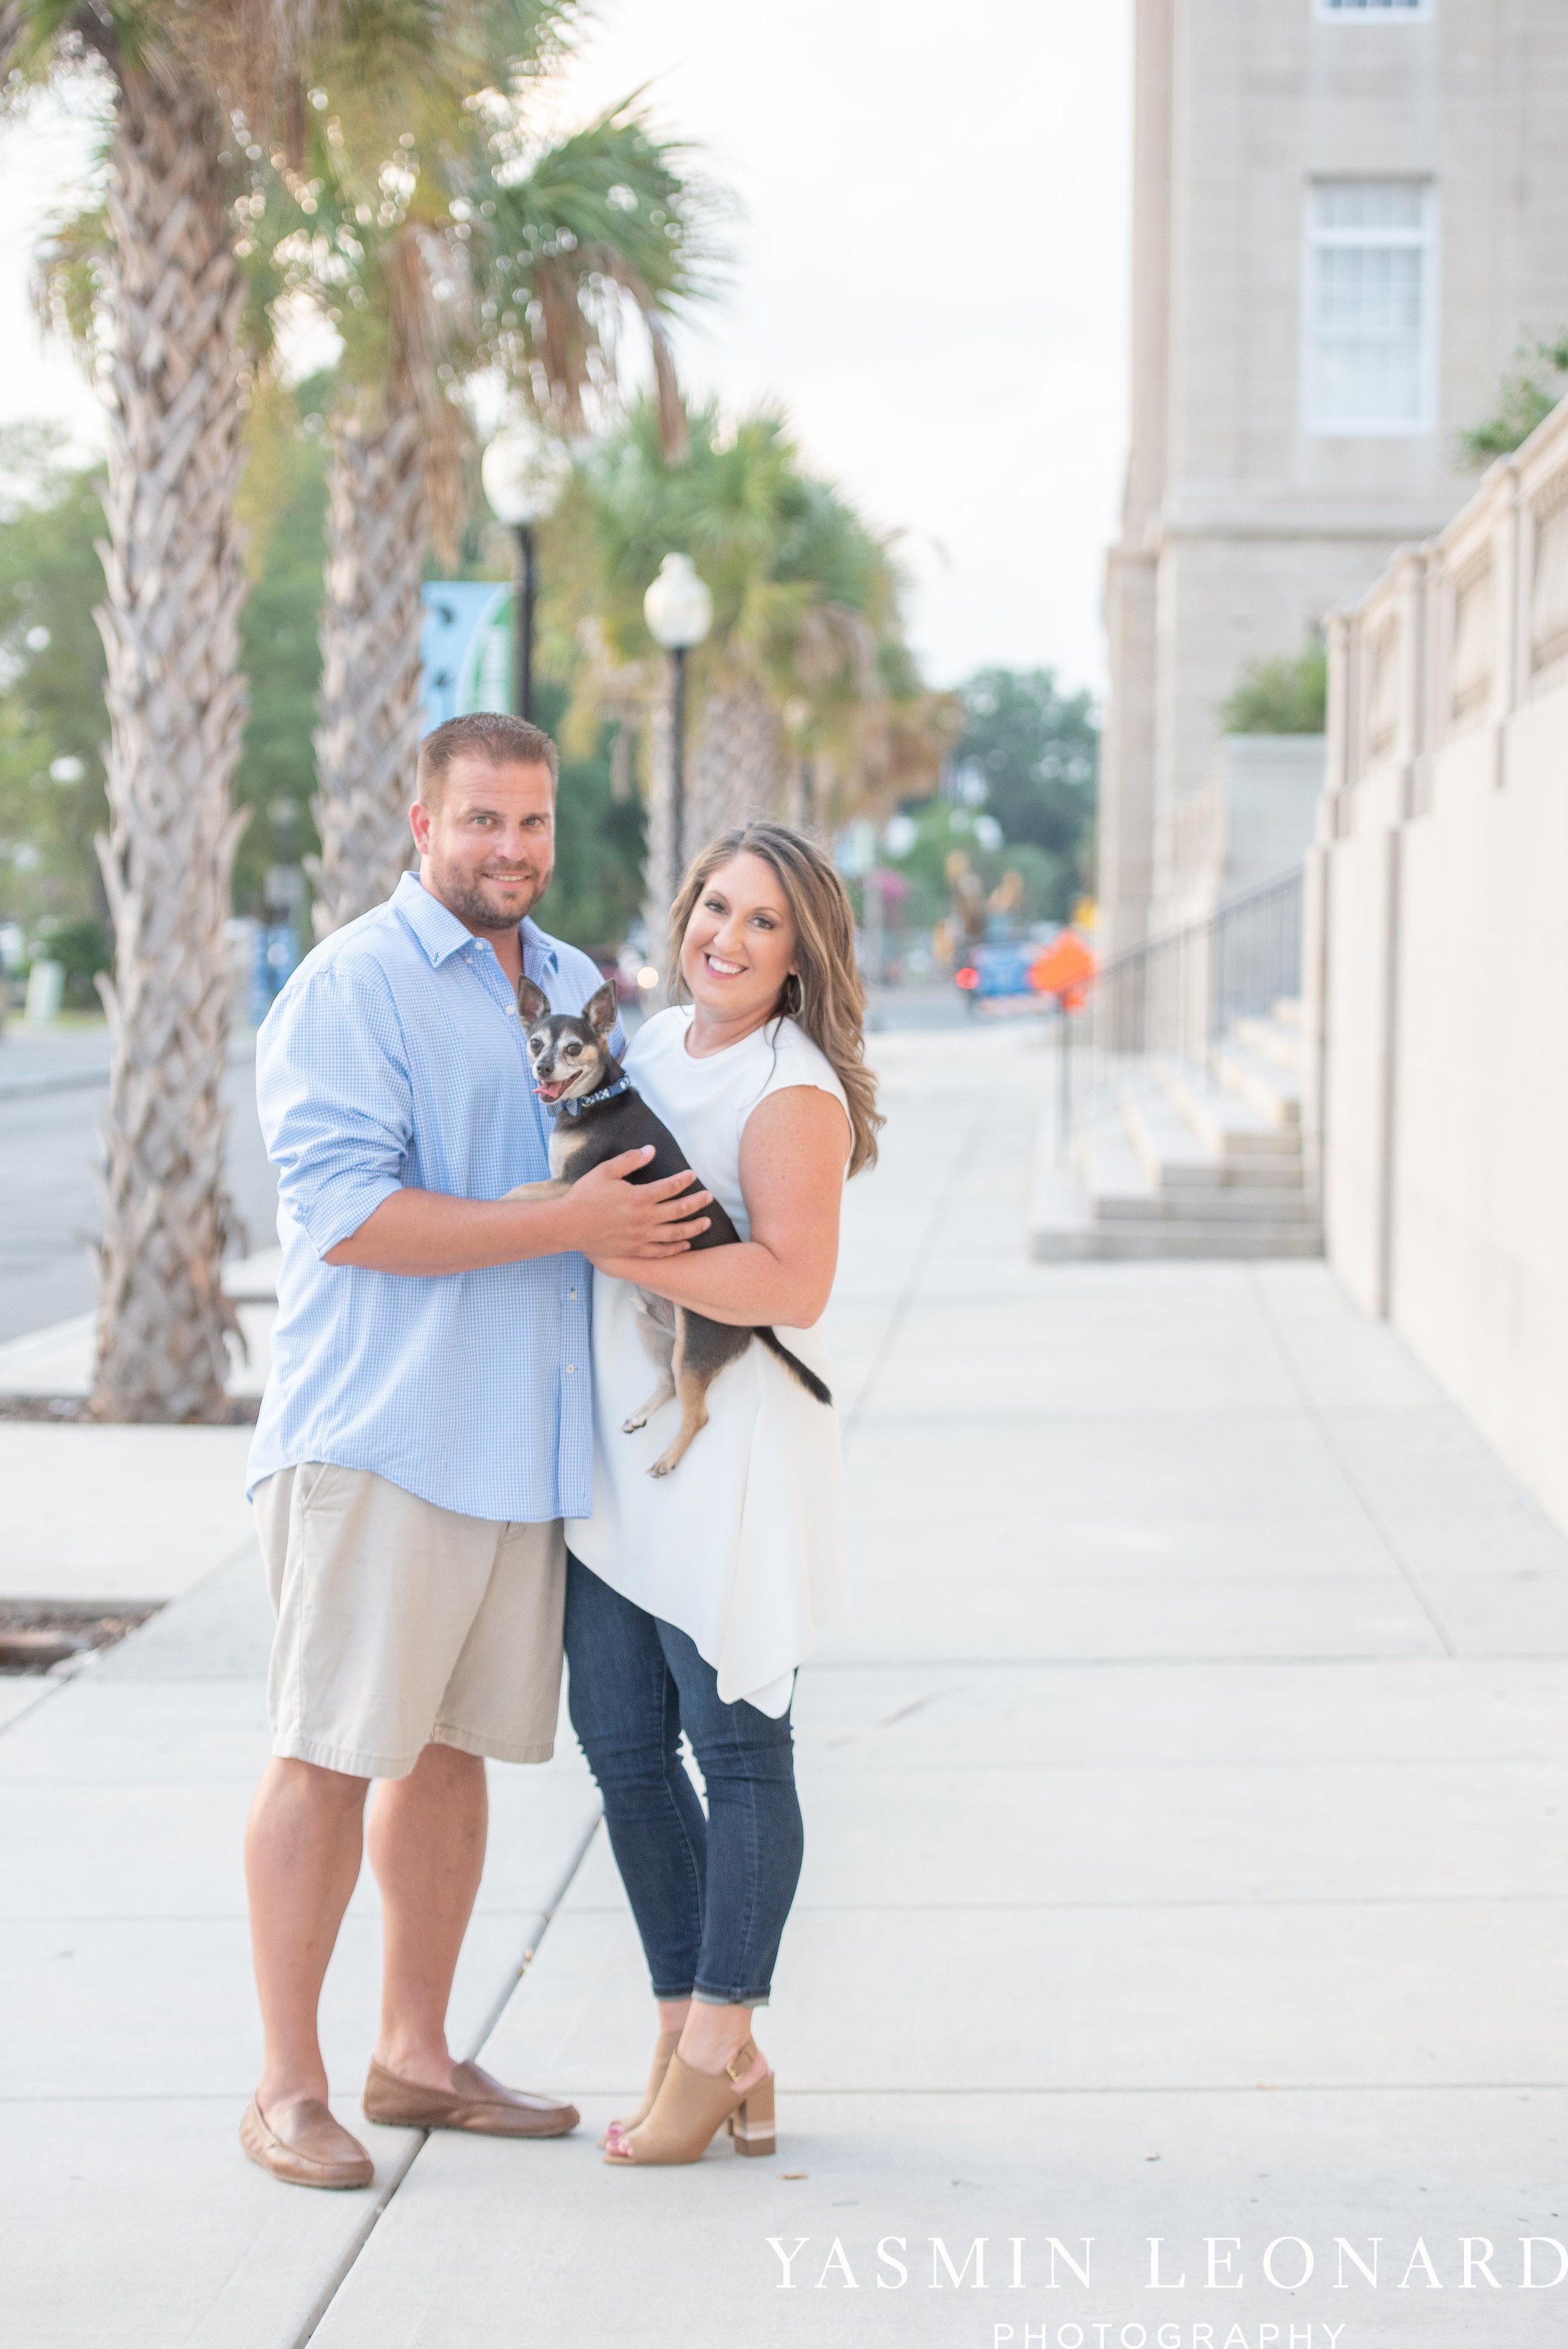 Wrightsville Beach Engagement Session - Wilmington Engagement Session - Downtown Wilmington Engagement Session - NC Weddings - Wilmington NC - Yasmin Leonard Photography-9.jpg